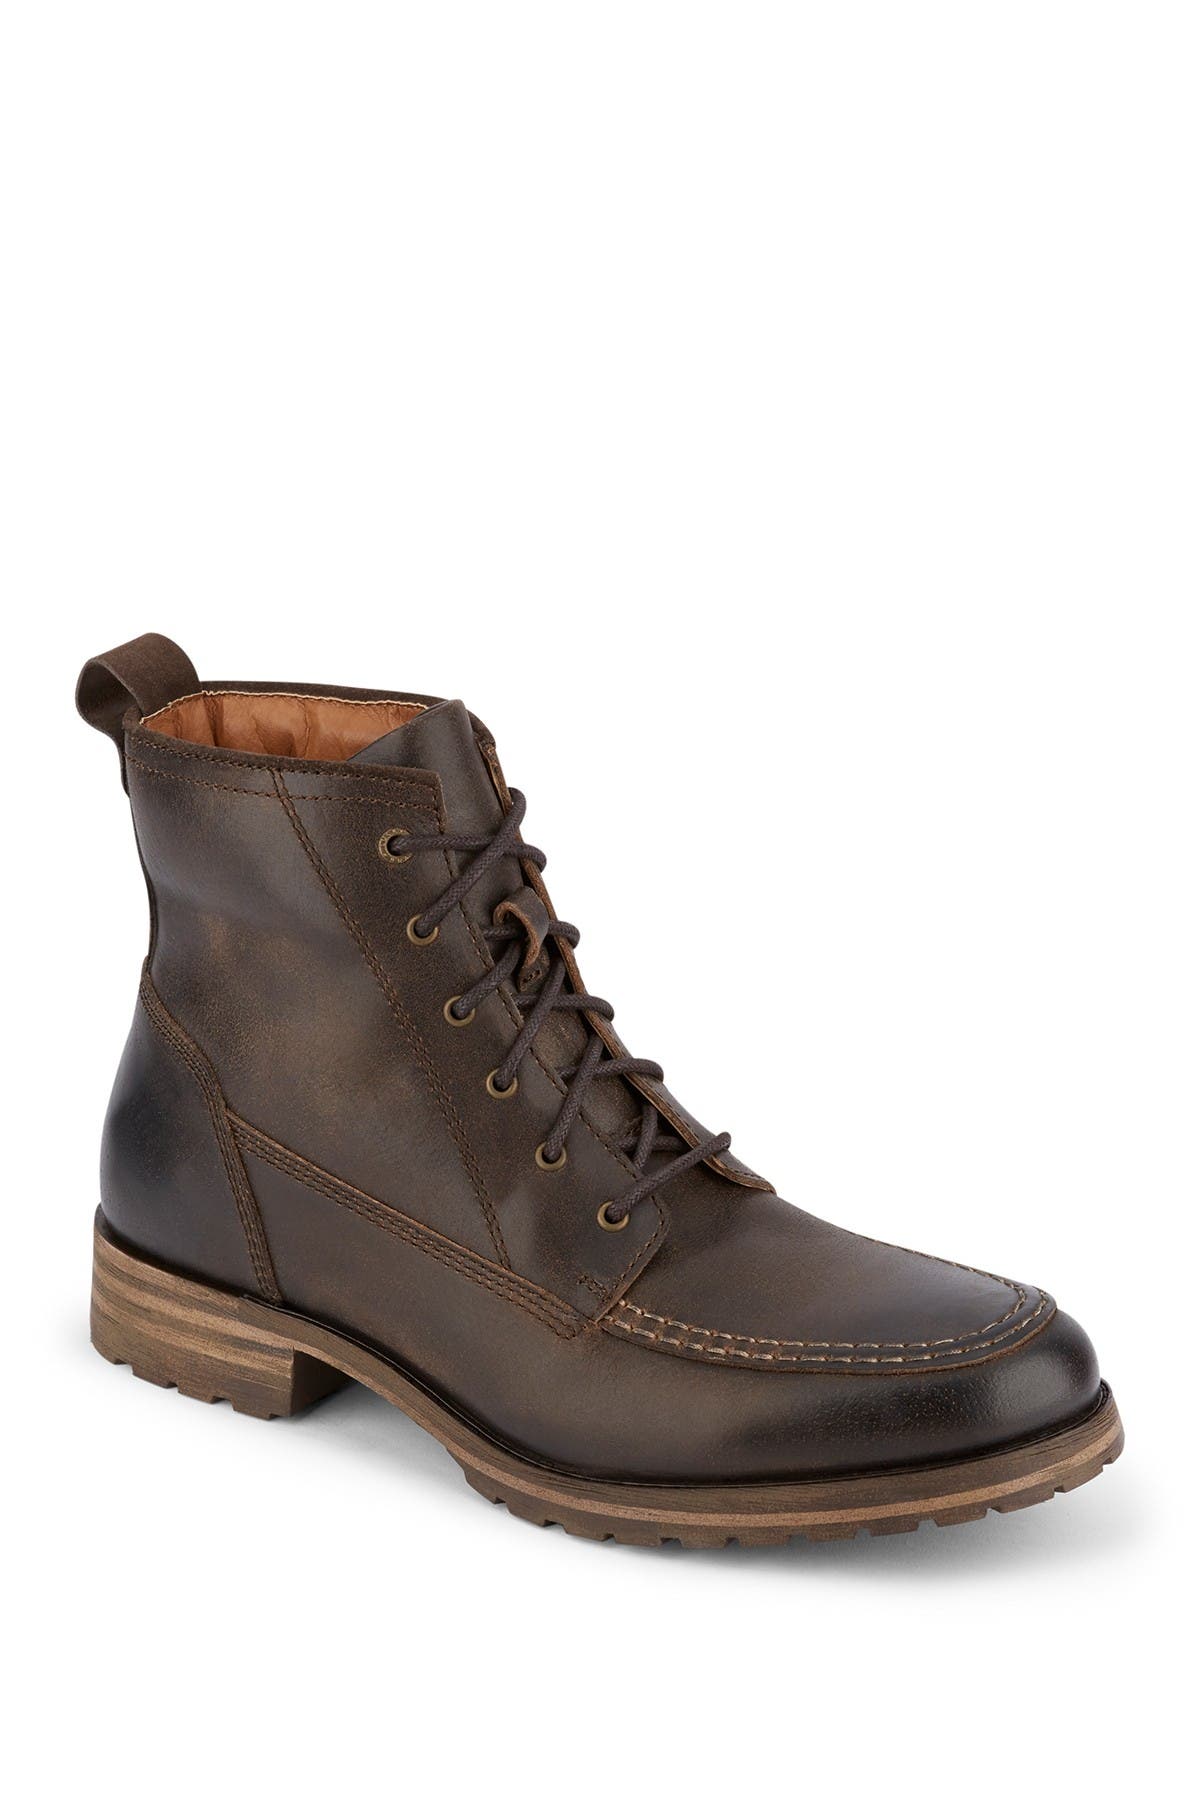 lucky brand lace up boots